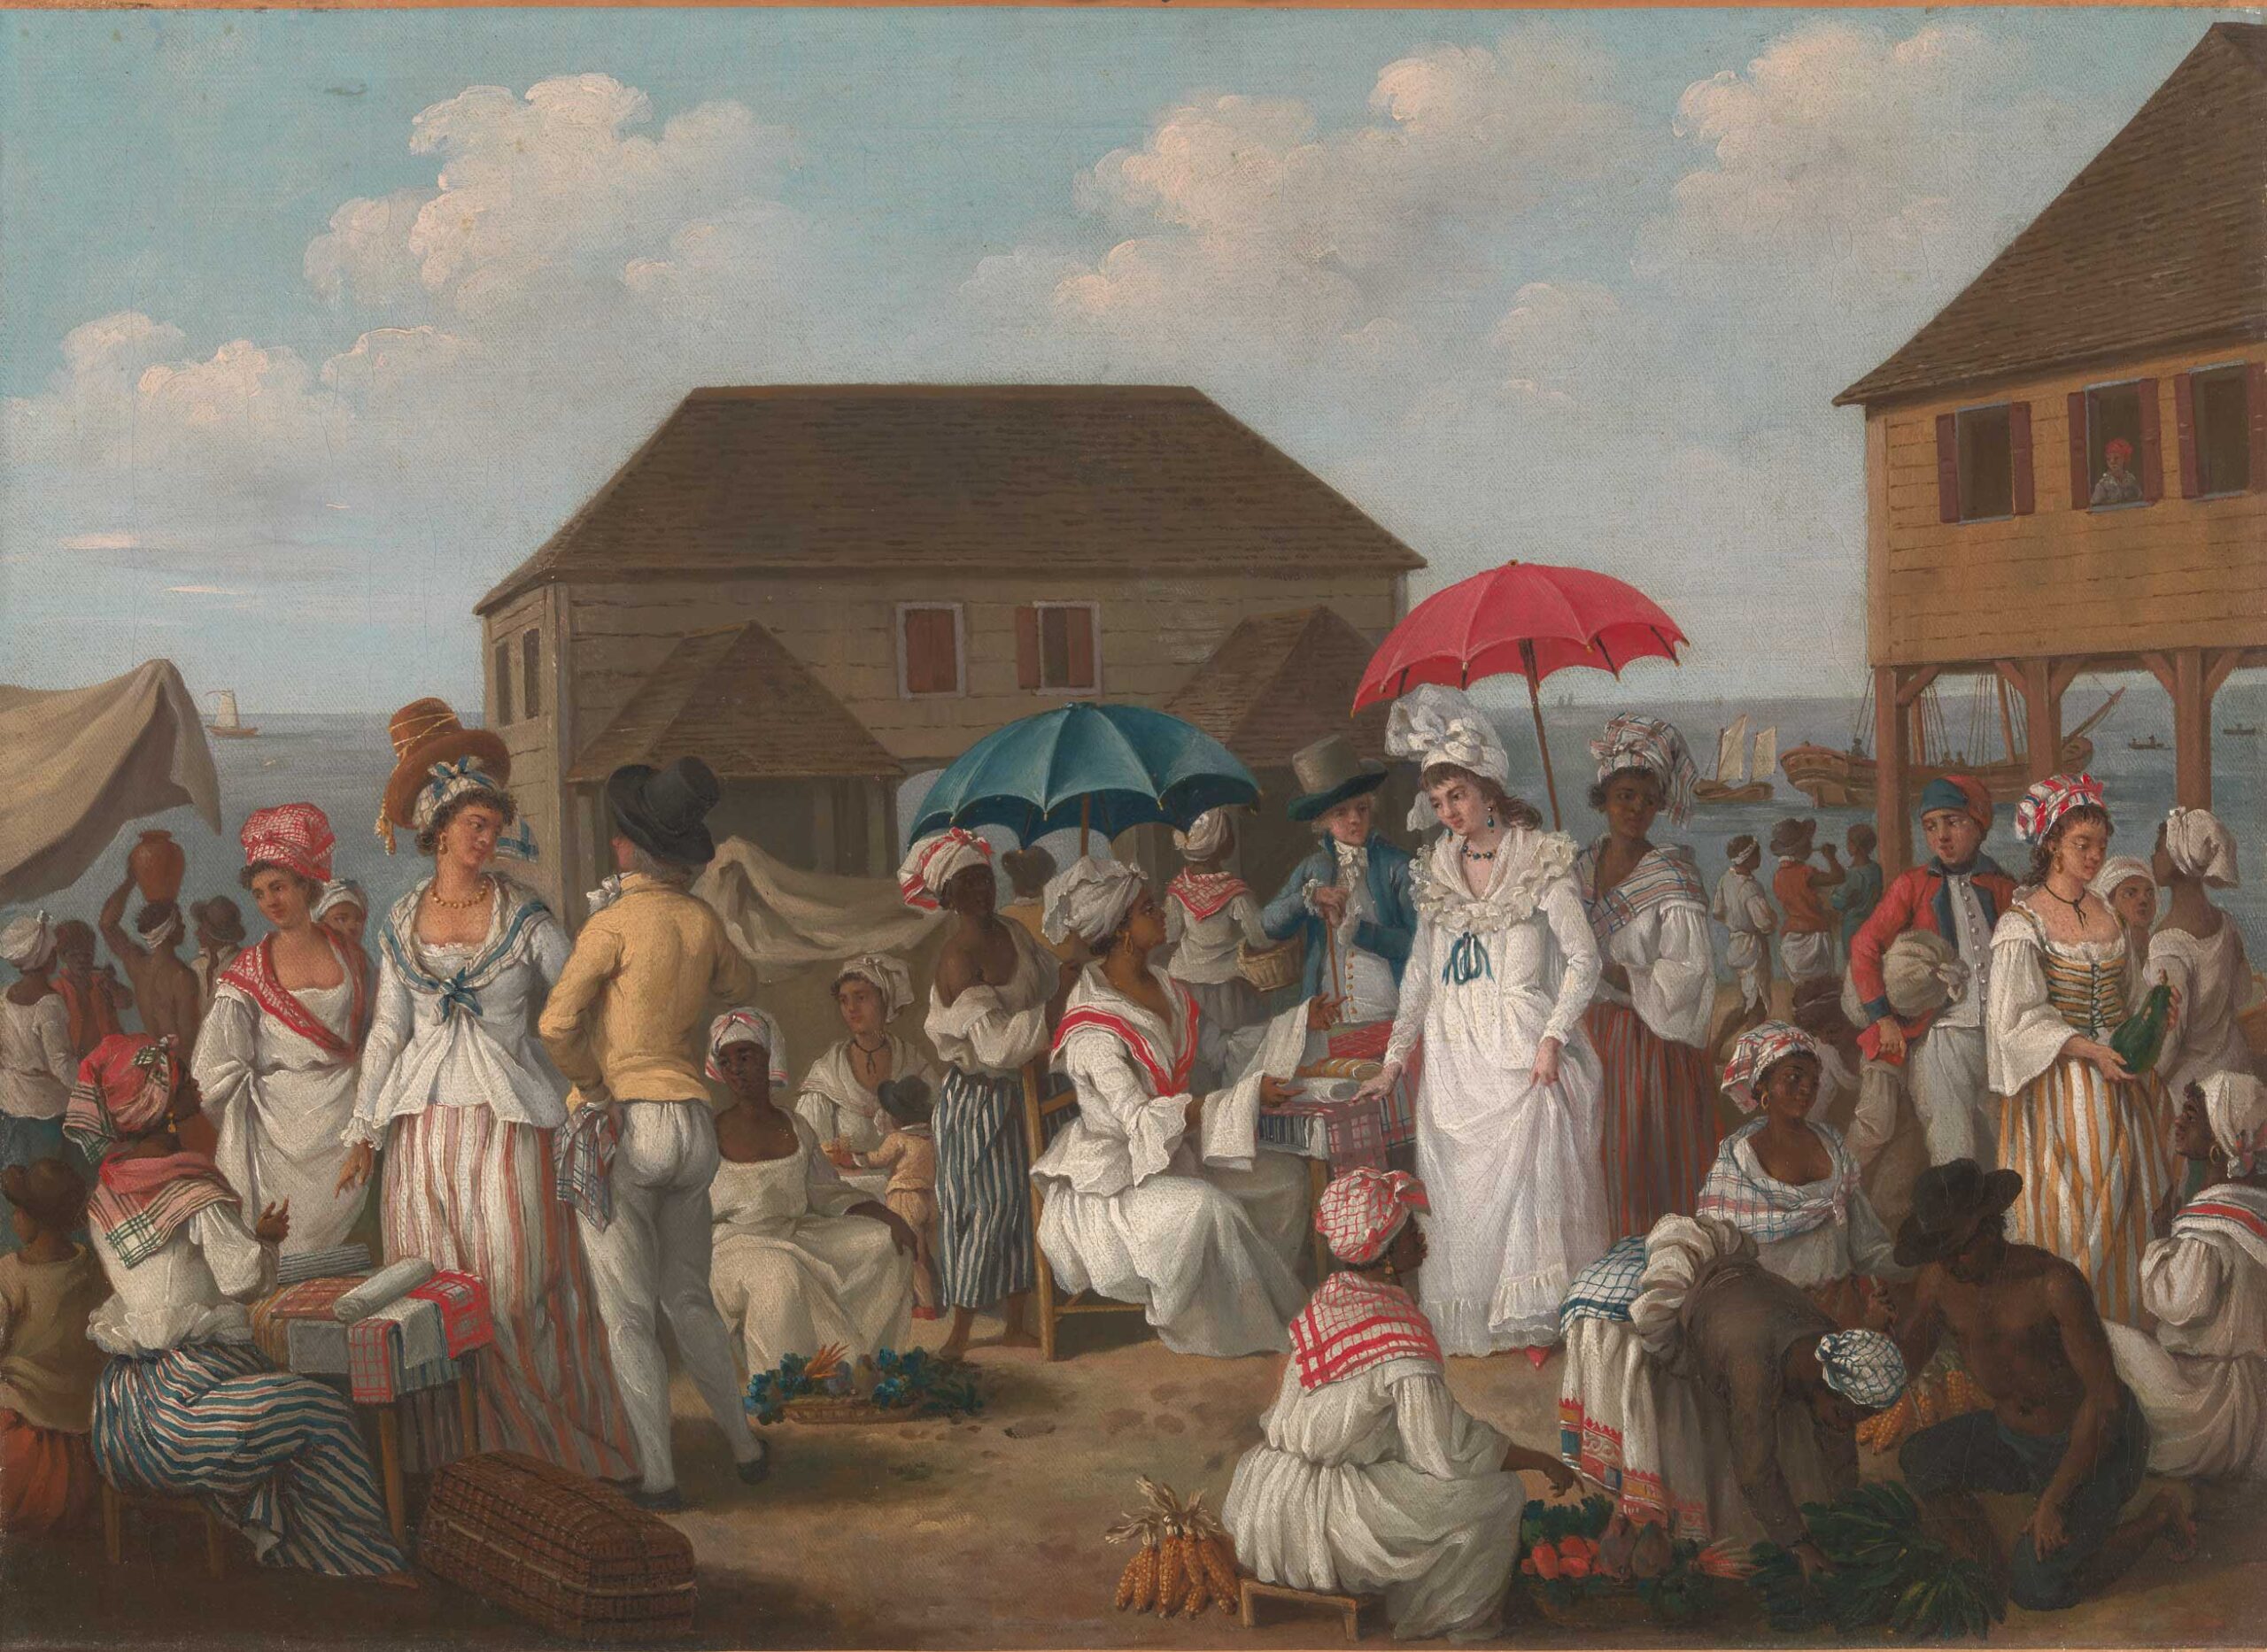 Agostino Brunias (1728-1796), "Linen Market, Dominica," c. 1780, oil on canvas, 19 5/8 x 27 in., Yake Center for British Art, New Haven, Paul Mellon Collection, B1991.25.76